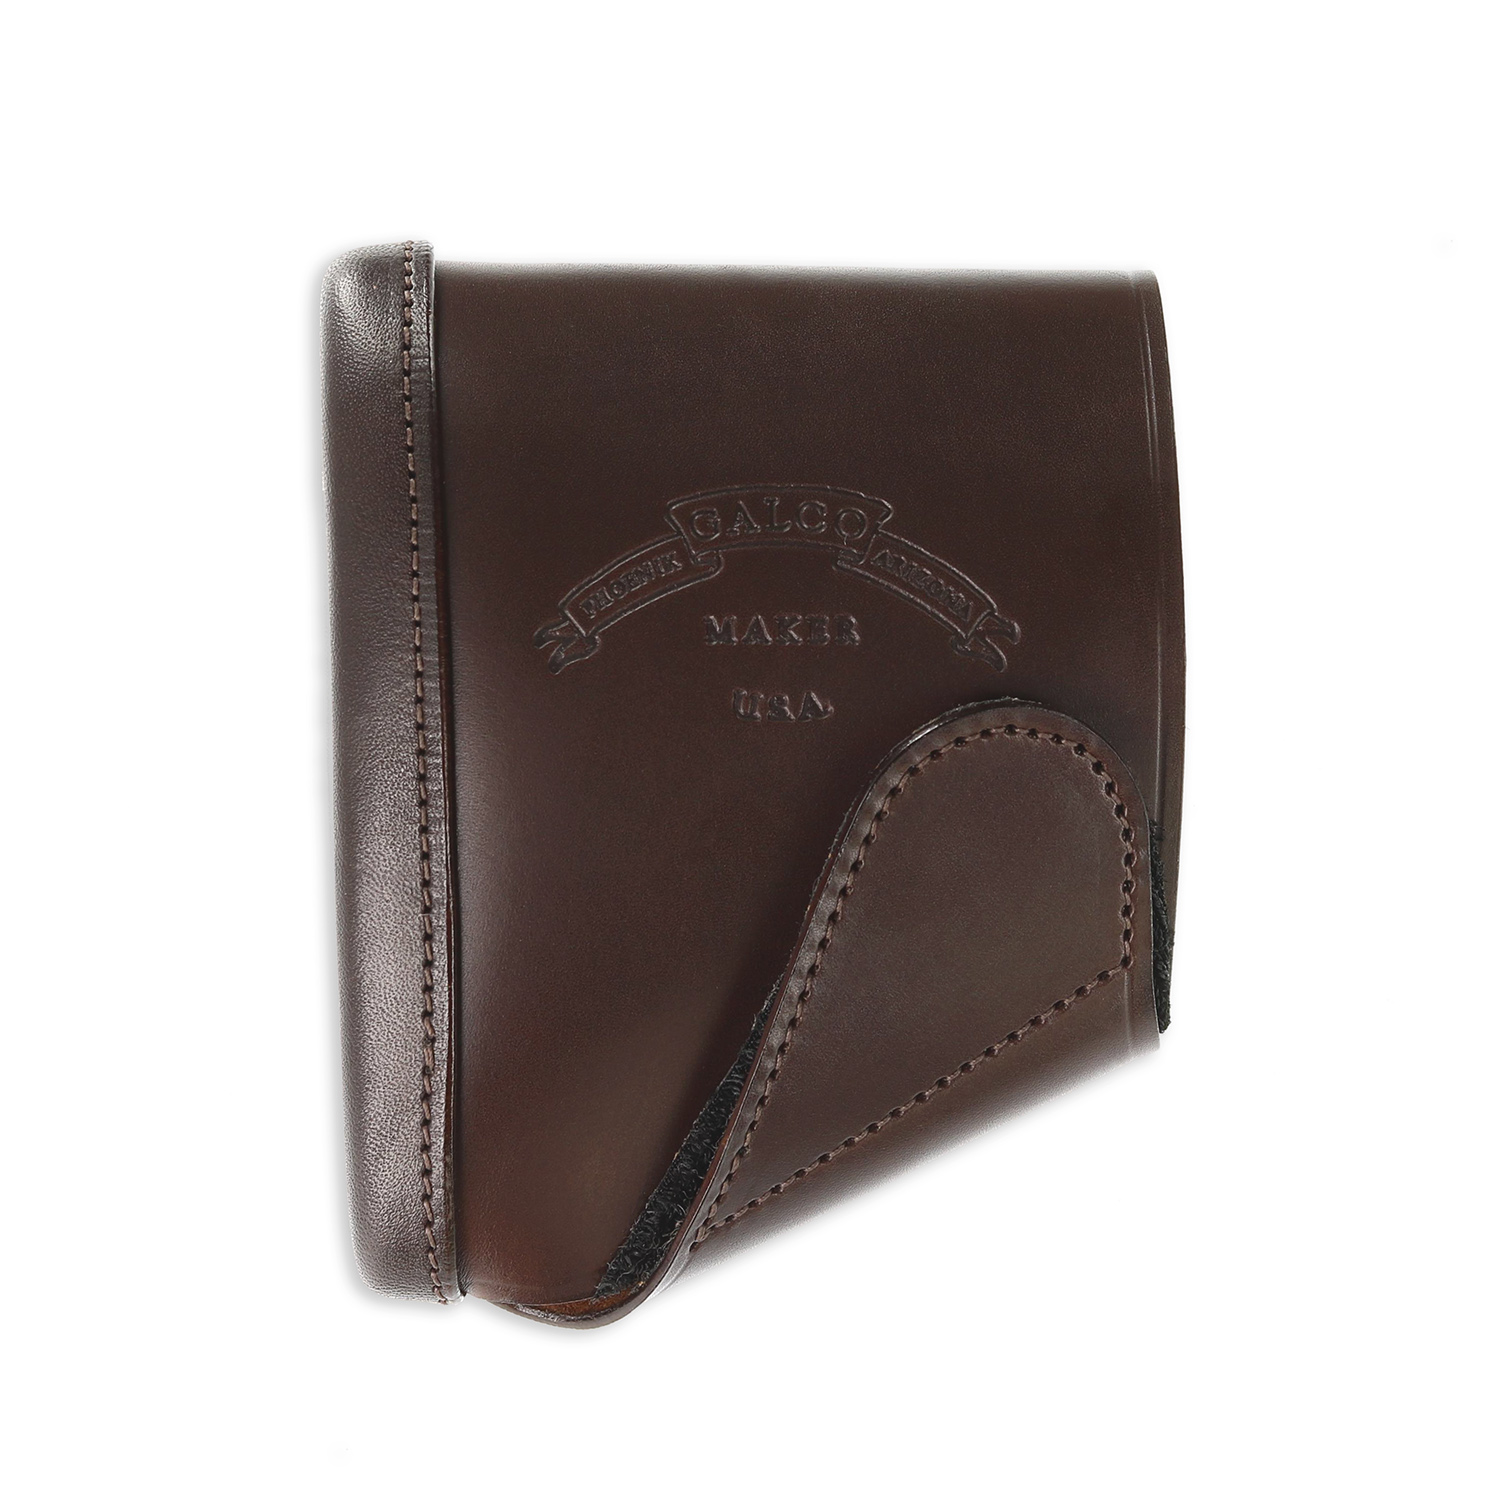 Extension Pad For Rifles Shotguns Details about   Hand Stiched Leather Rifle Gun Recoil Pads 